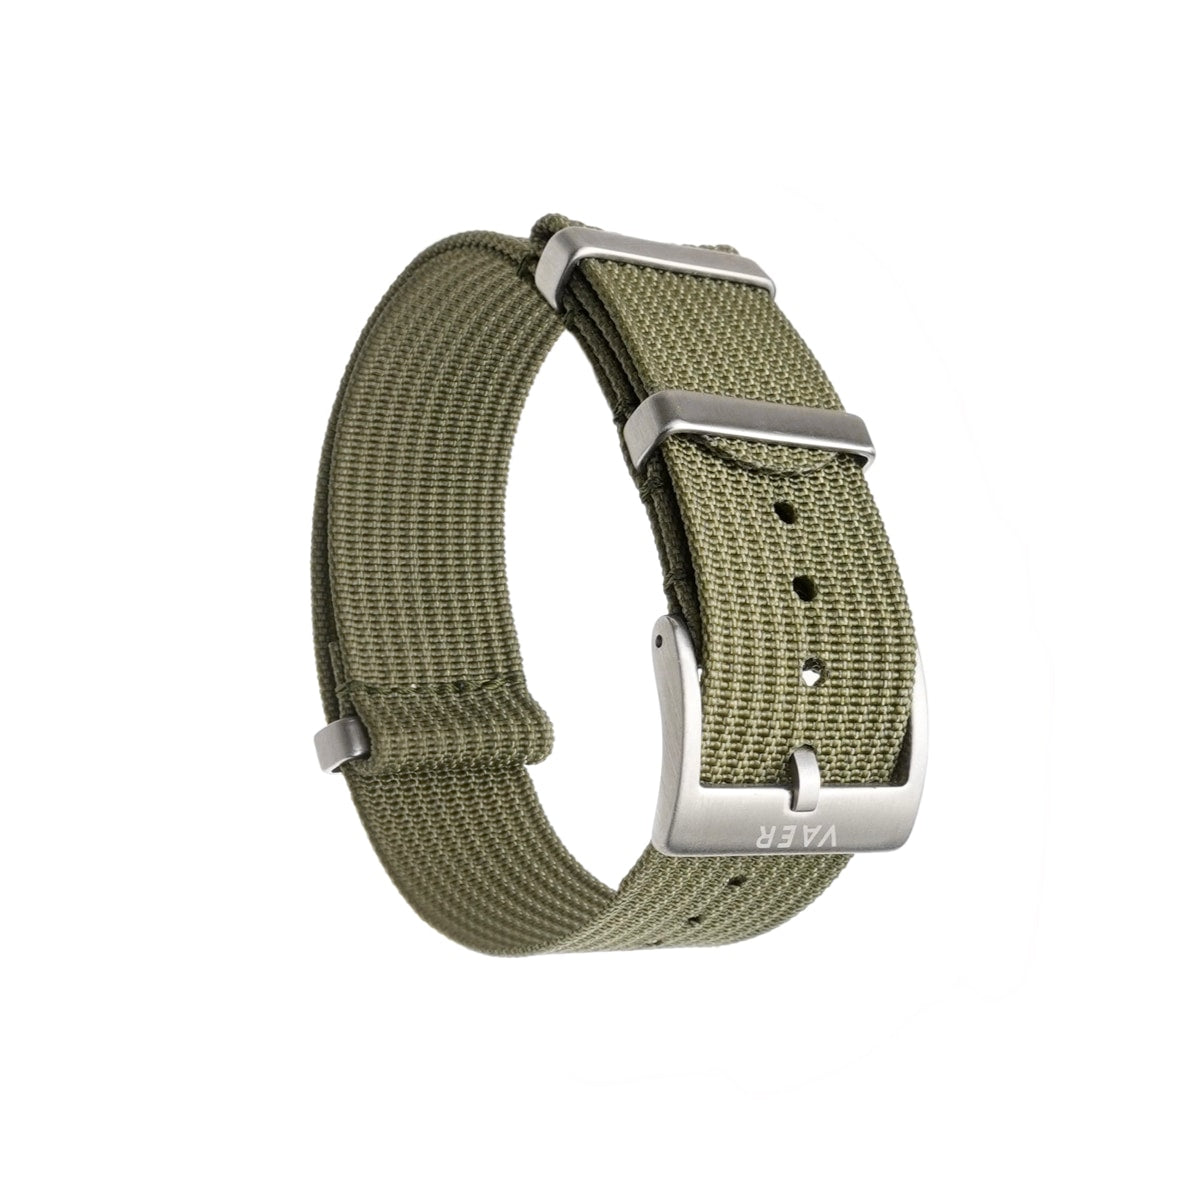 Recon Military Watch Strap